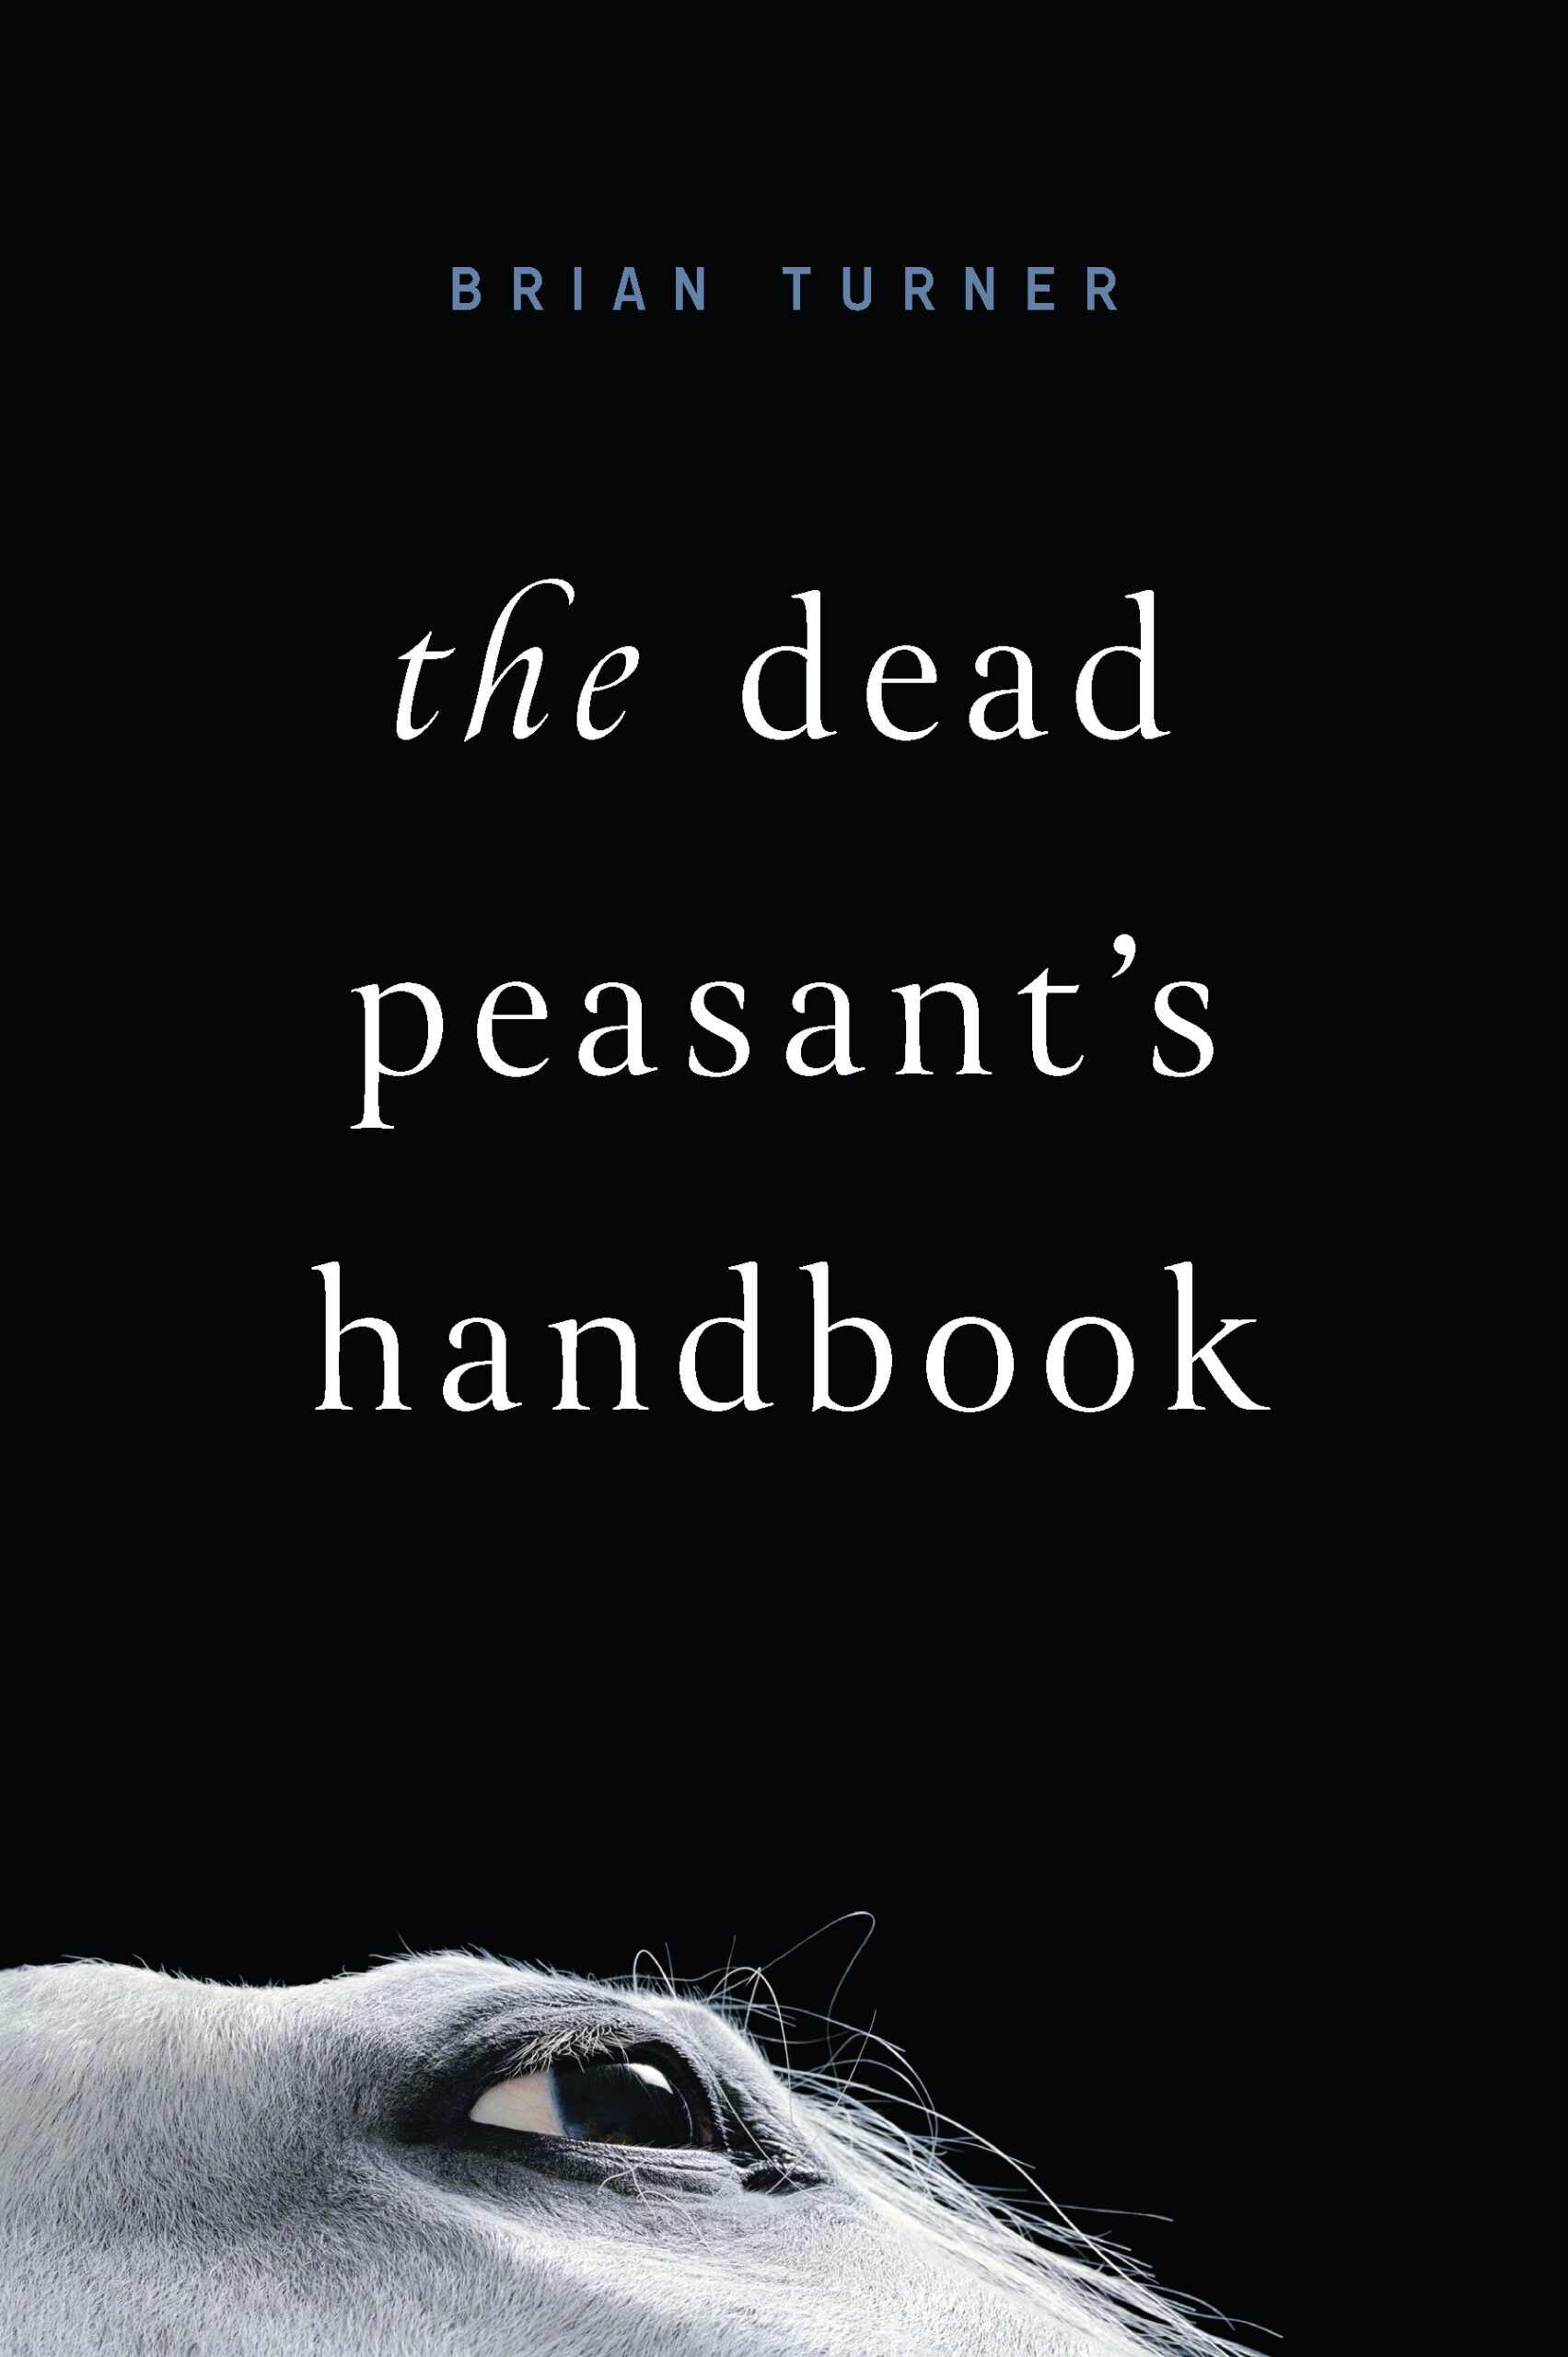 Book Cover Image of “The Dead Peasant’s Handbook”